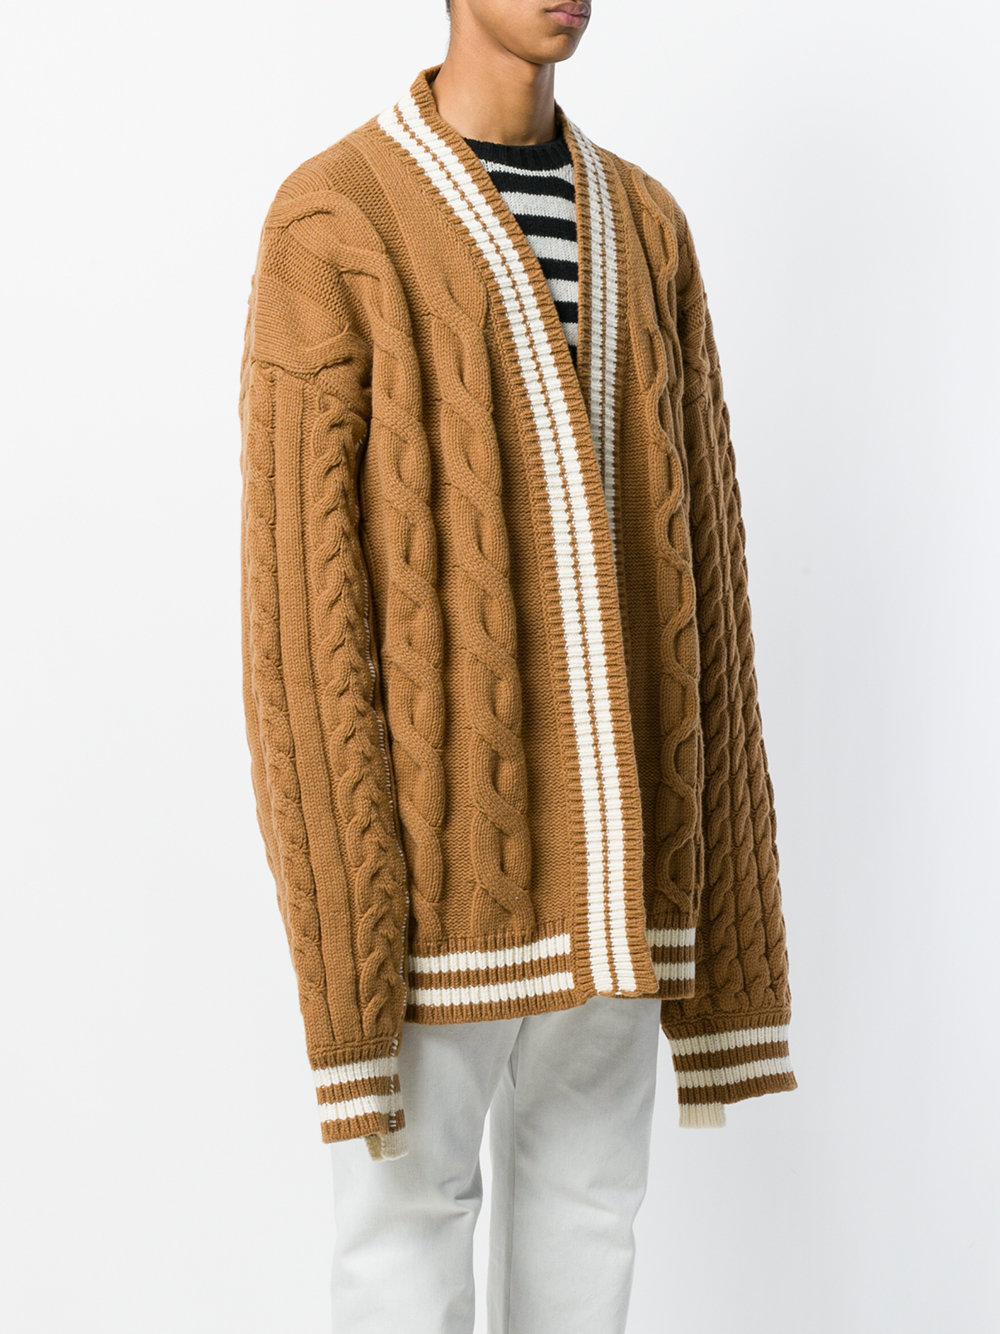 Paura Oversized Cable-knit Cardigan in Brown for Men | Lyst